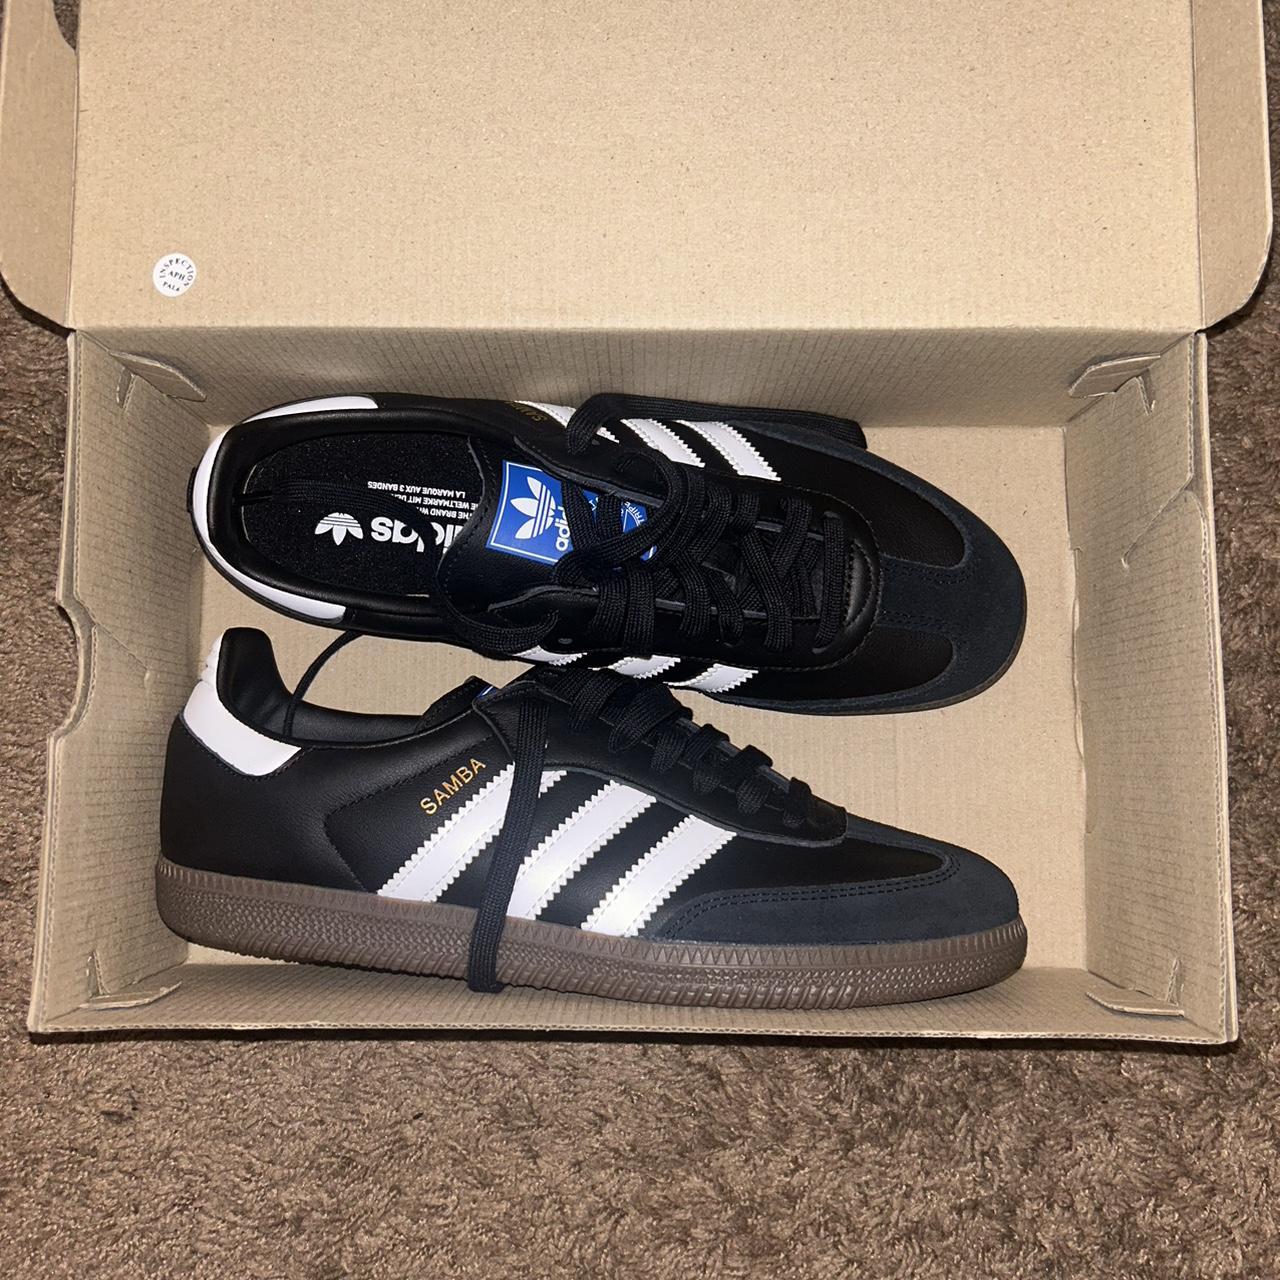 Adidas Men's Black and White Trainers